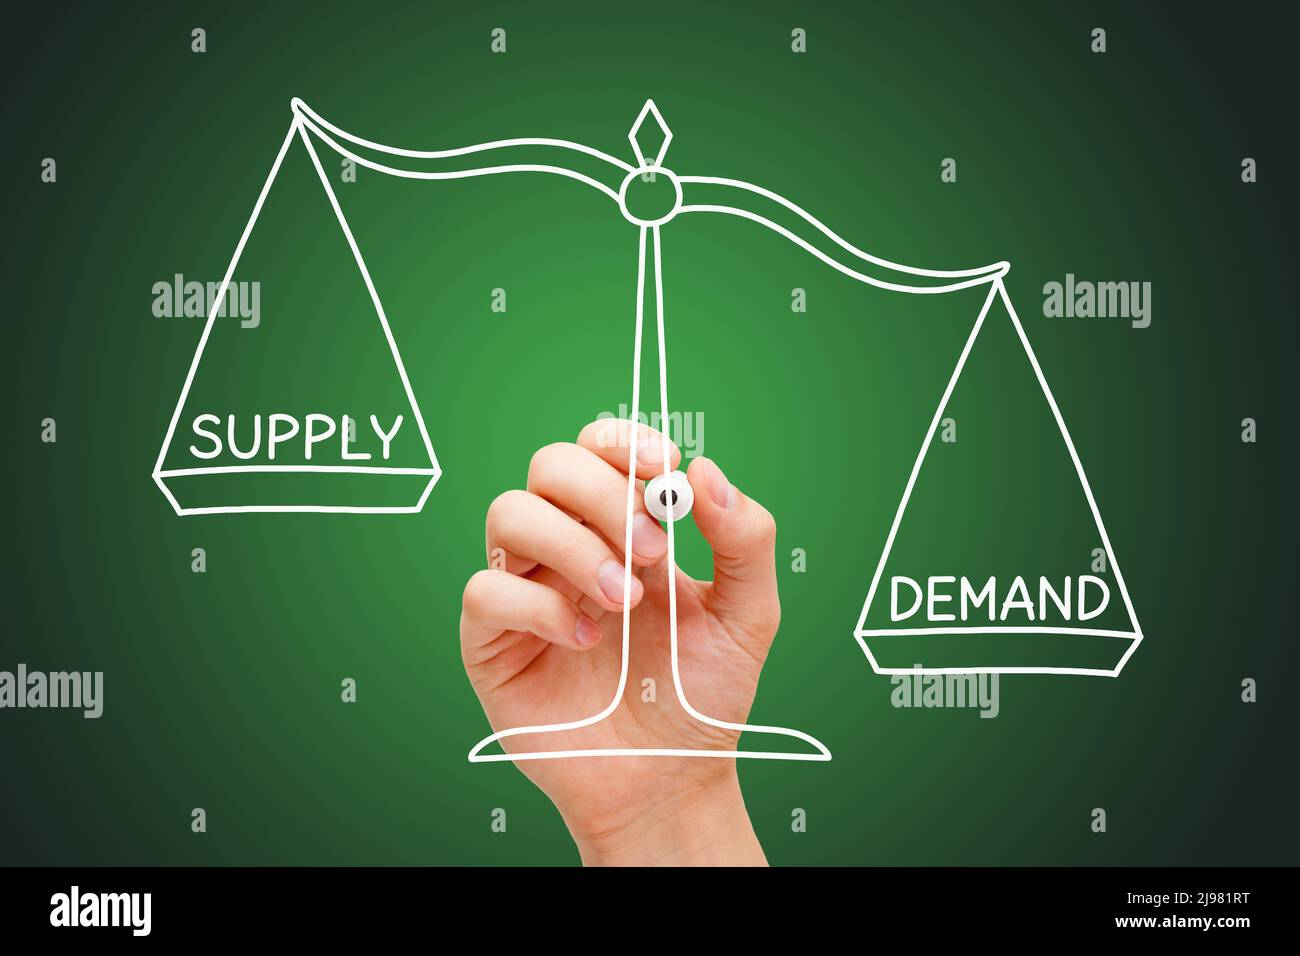 Hand drawing Global Supply Chain Crisis scale concept. High demand low supply. Stock Photo